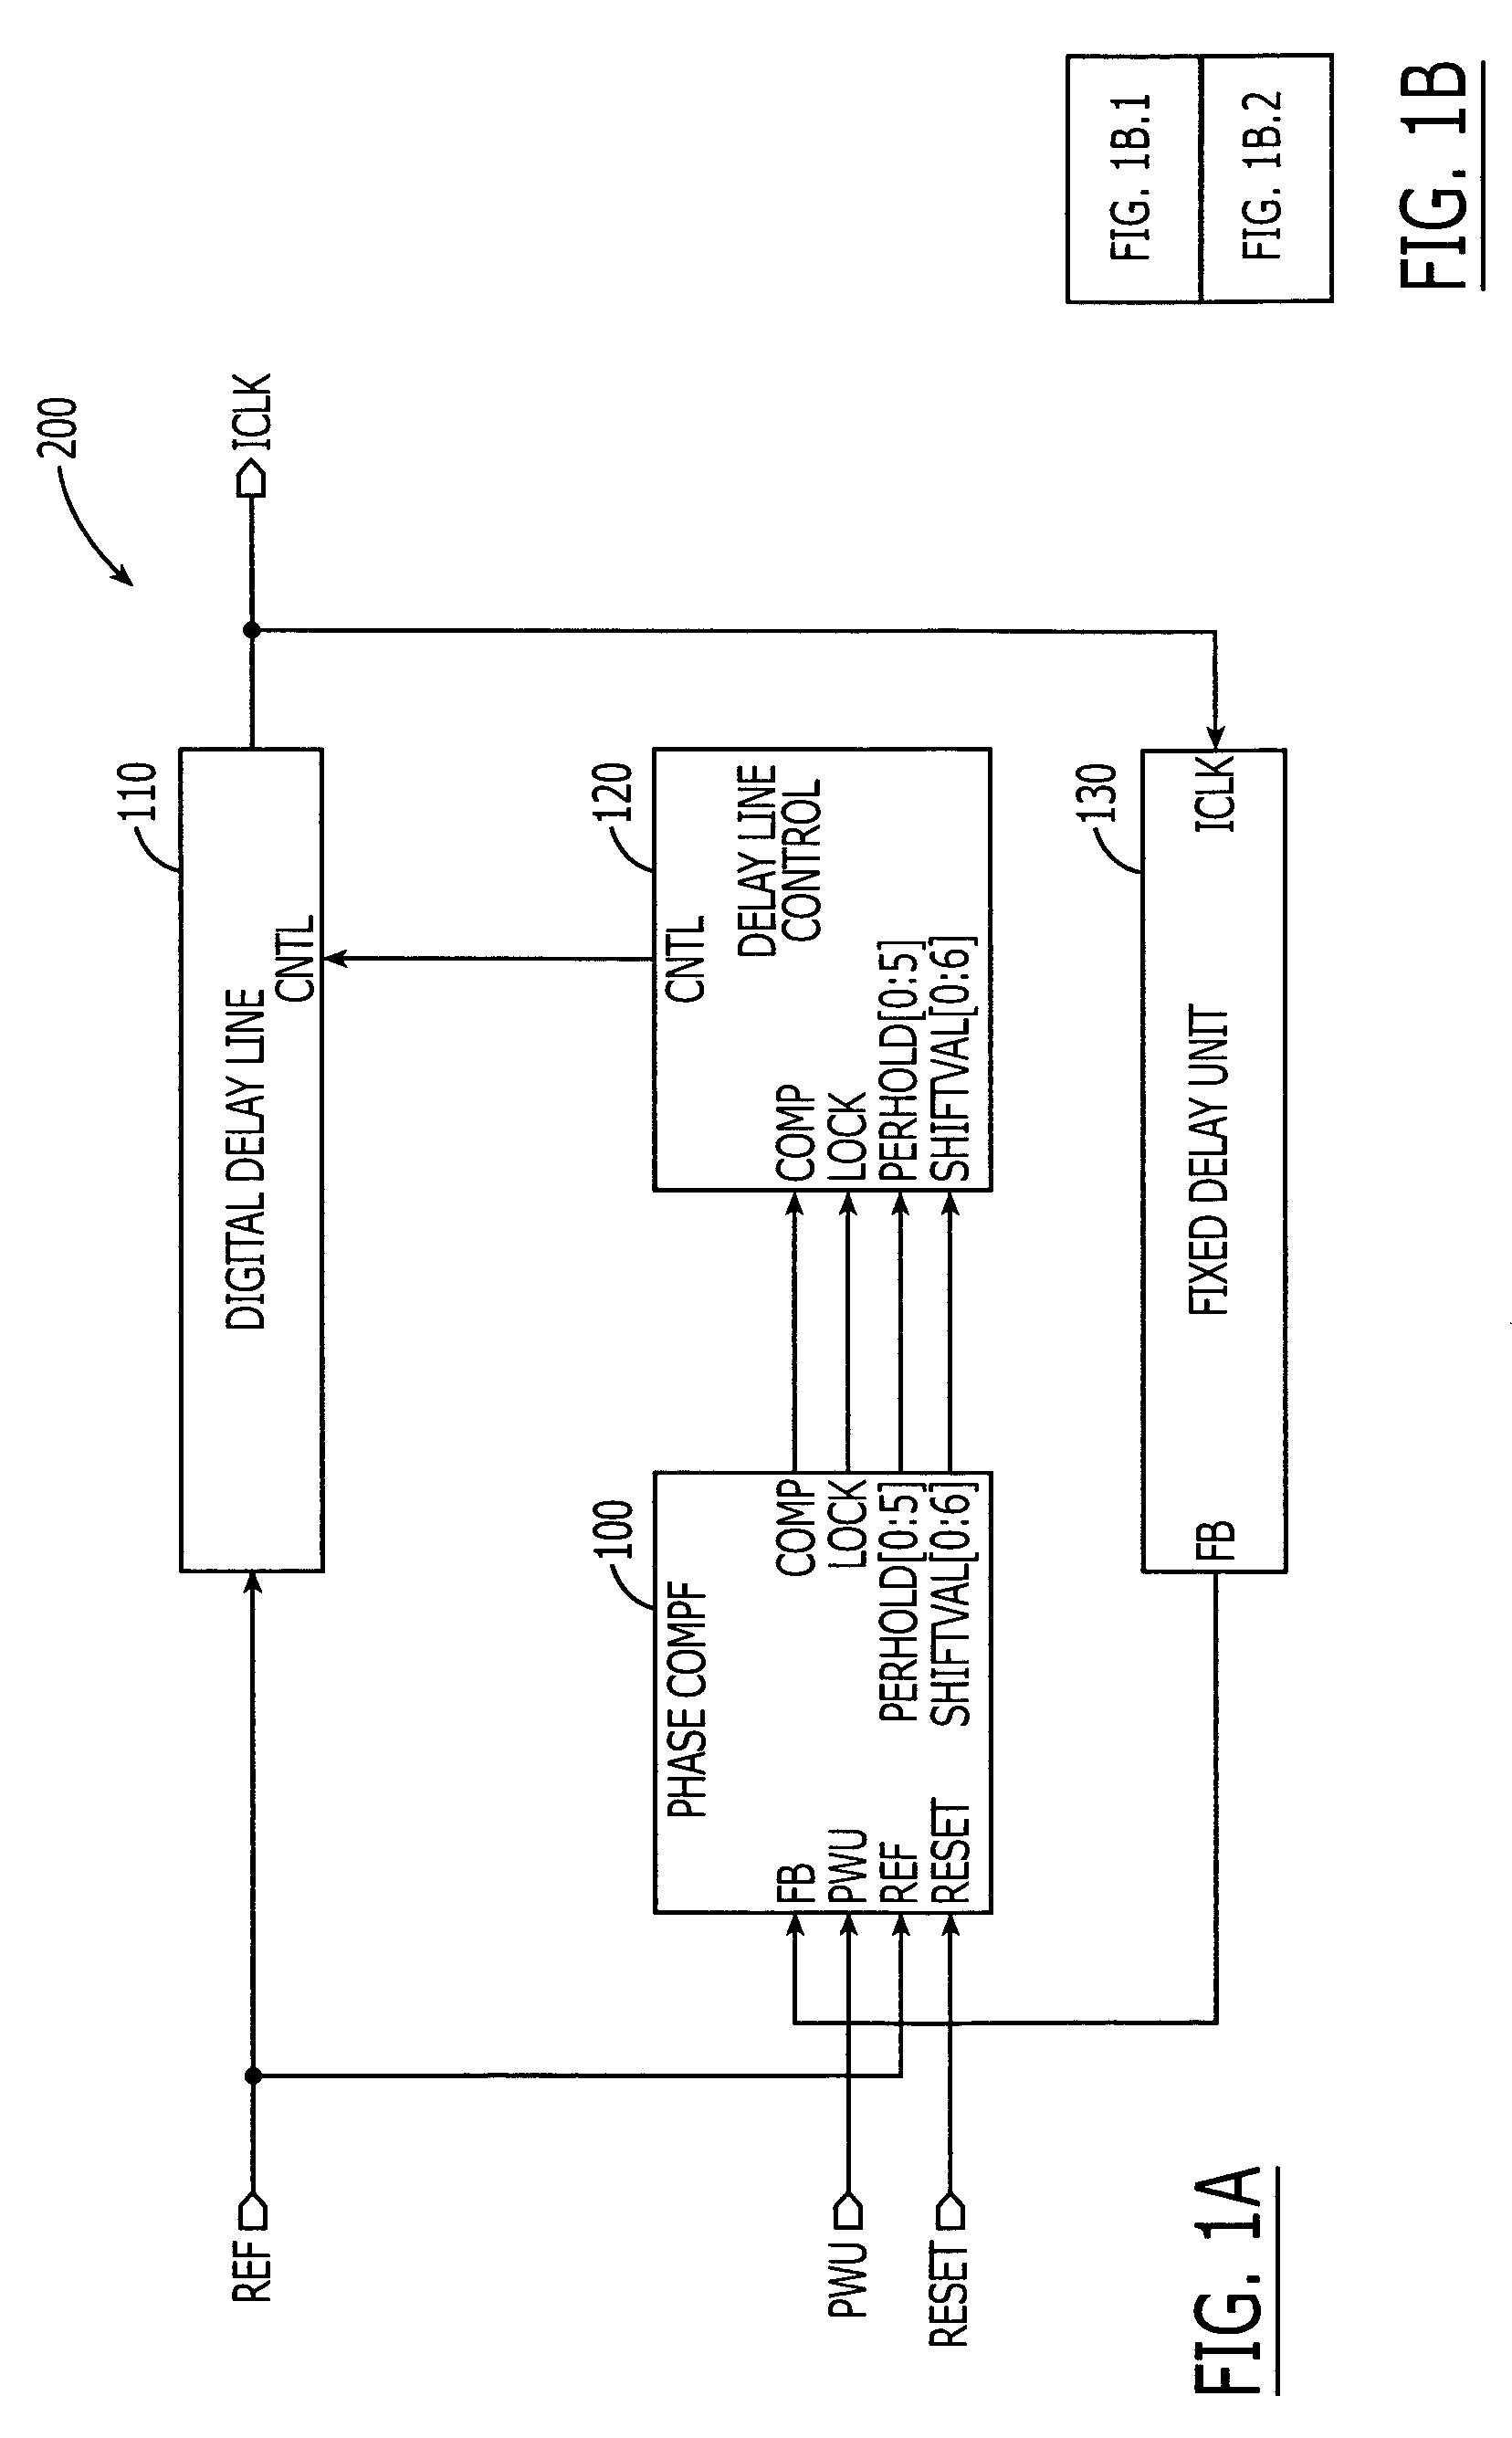 Delay-locked loop (DLL) integrated circuits having binary-weighted delay chain units with built-in phase comparators that support efficient phase locking